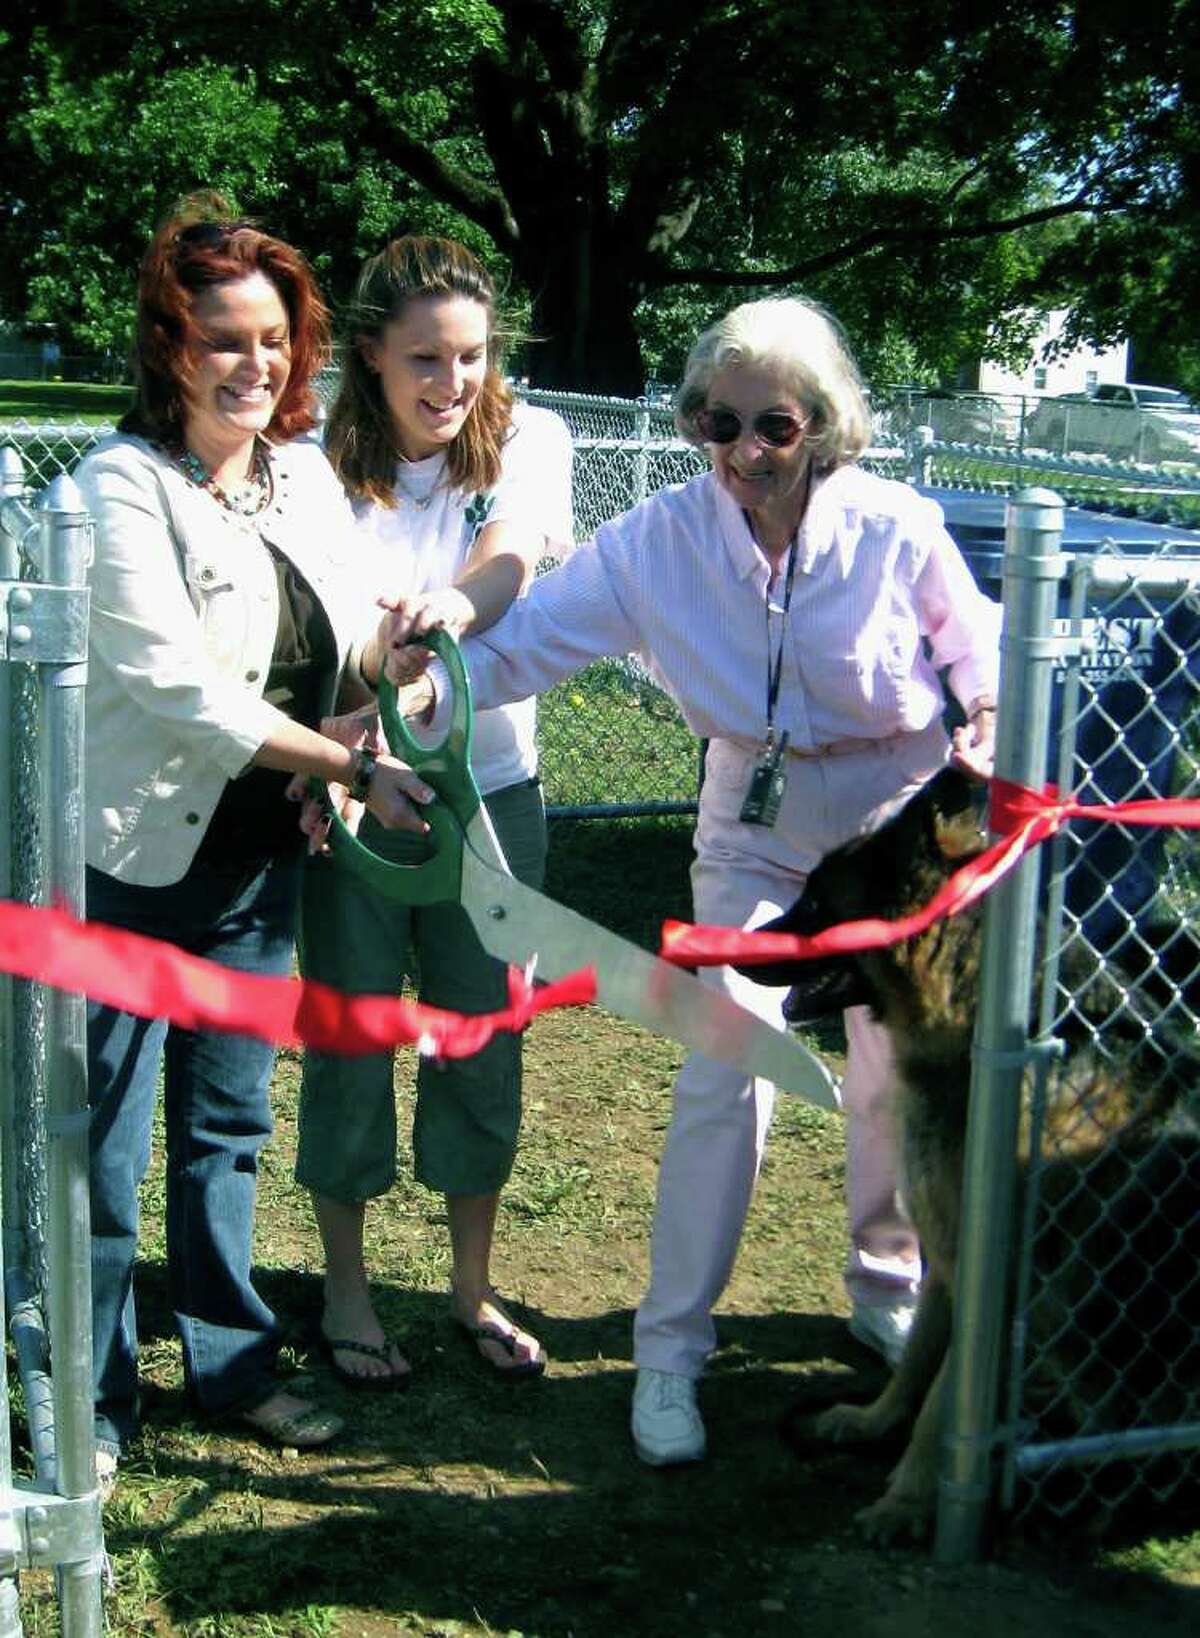 SPECTRUM/Performing the ribbon-cutting at the Aug. 28, 2010 opening of the town's Candlewoof! dog park along Pickett District Road in New Milford are, from left to right, New Miolford mayoral administrative aide Tammy Reardon, her sister, Lori Sartwell, who serves as the dog park committee president, and Frances Terry, whose family donated the fencing for the park in memory of her husband, Norman Terry. Looking on with great interest is Mrs. Terry's dog, Jake.